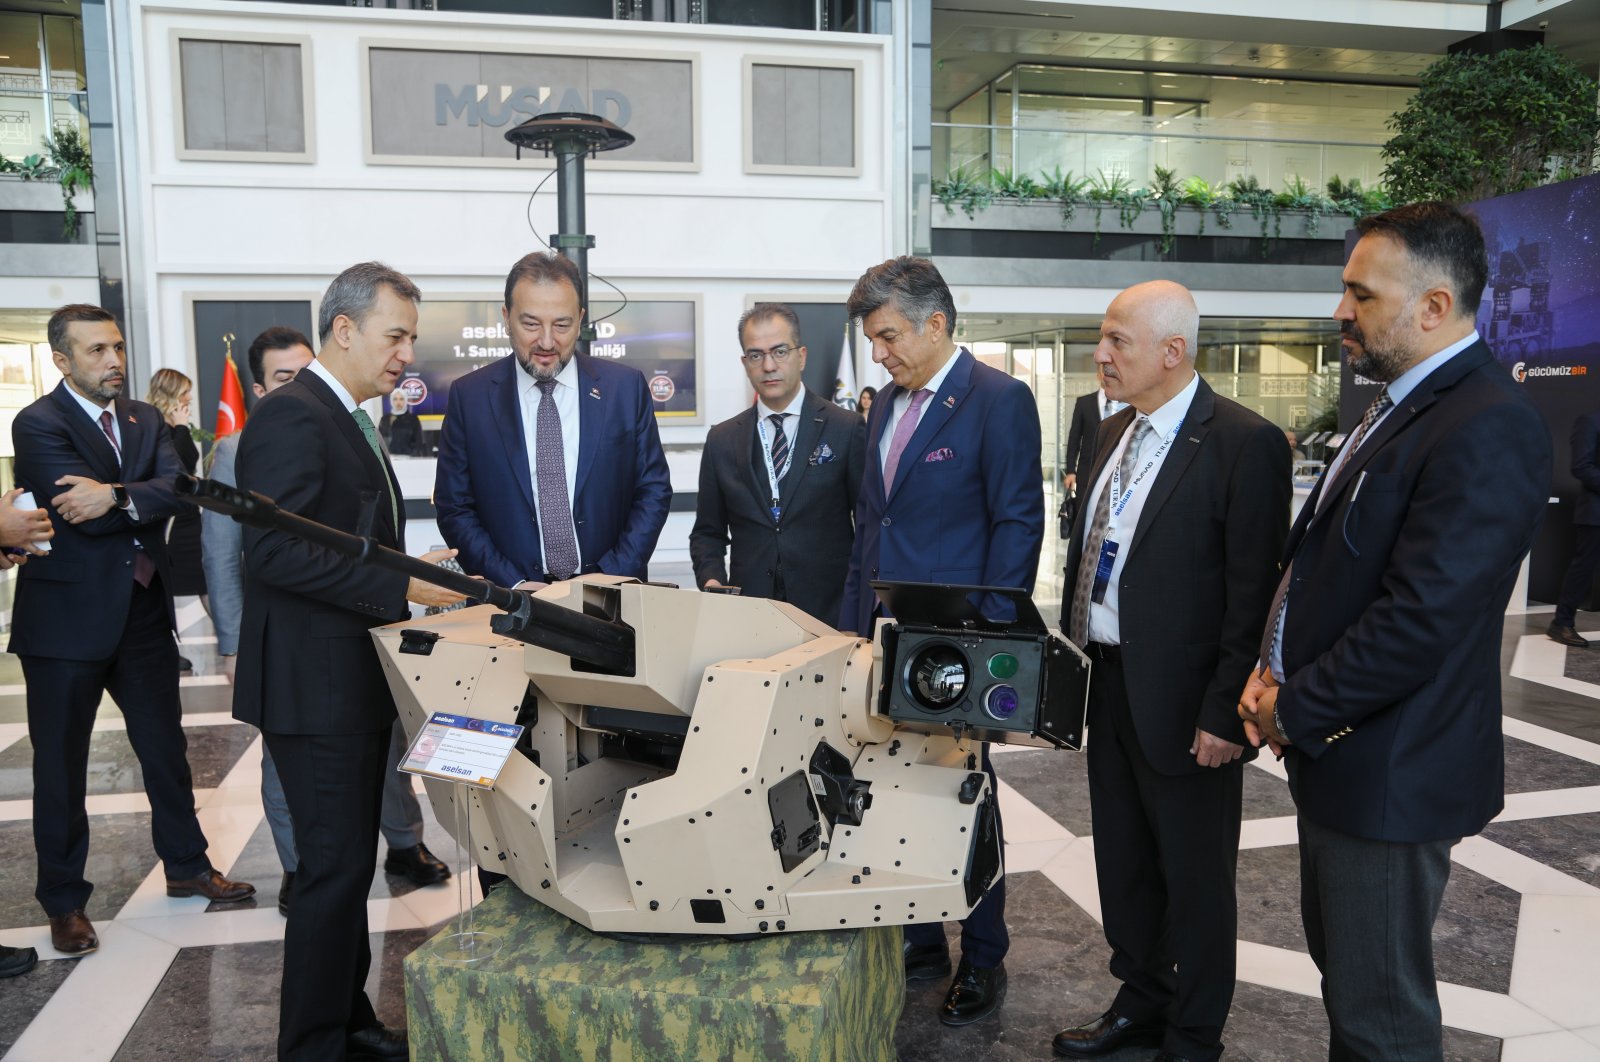 Aselsan and MÜSIAD officials inspect a defense product produced by Aselsan and suppliers in MÜSIAD headquarters, Istanbul, Türkiye, Dec. 9, 2022. (Courtesy of MÜSIAD)